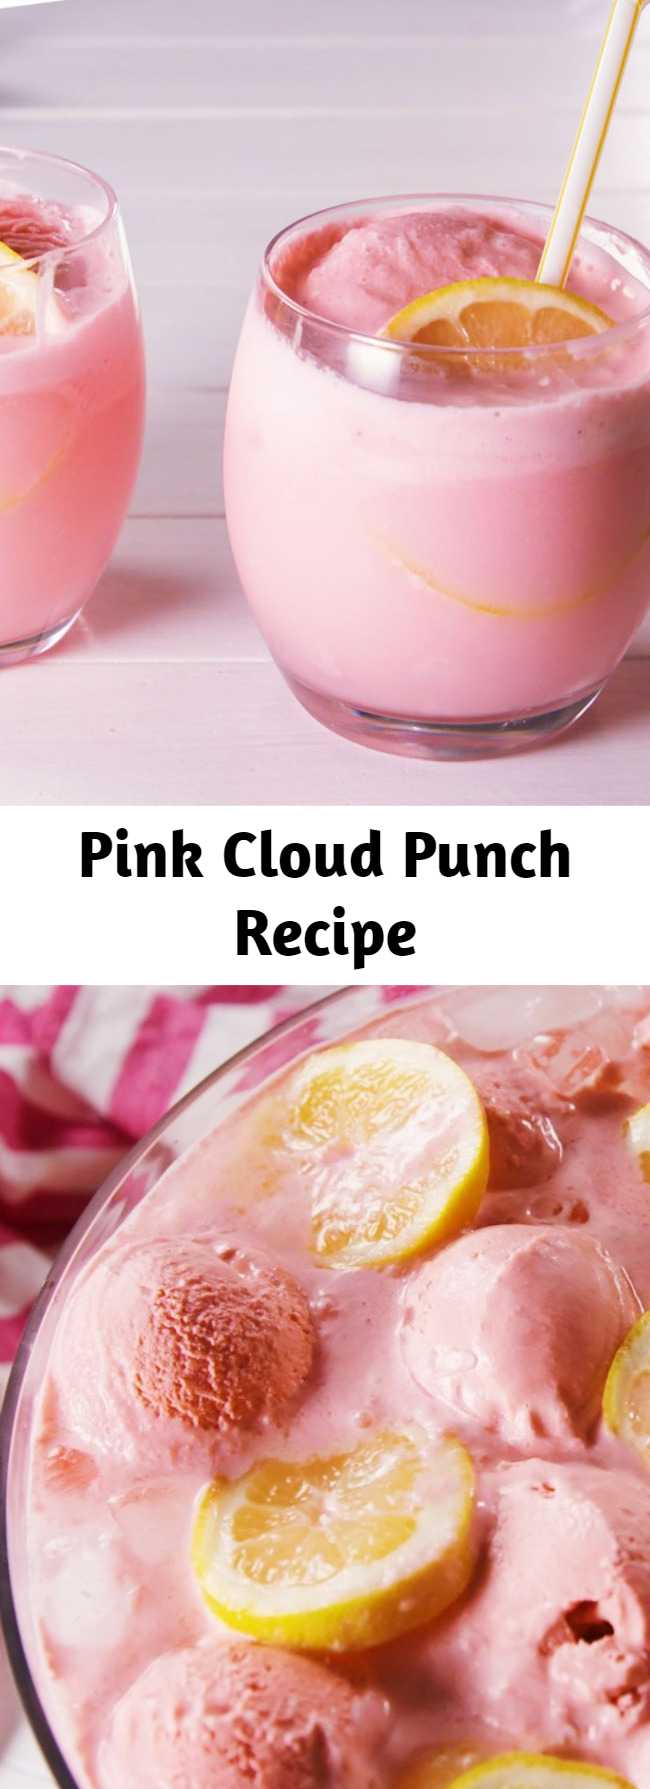 Pink Cloud Punch Recipe - When you're hosting a baby or bridal shower, this boozy punch ensures that your party is anything but boring. It also makes those goofy shower games 1,000x more fun. (Don't worry, the mom-to-be will be just as happy with a nonalcoholic sherbet float.) #easyrecipe #cocktail #bridalshower #babyshower #drinkrecipe